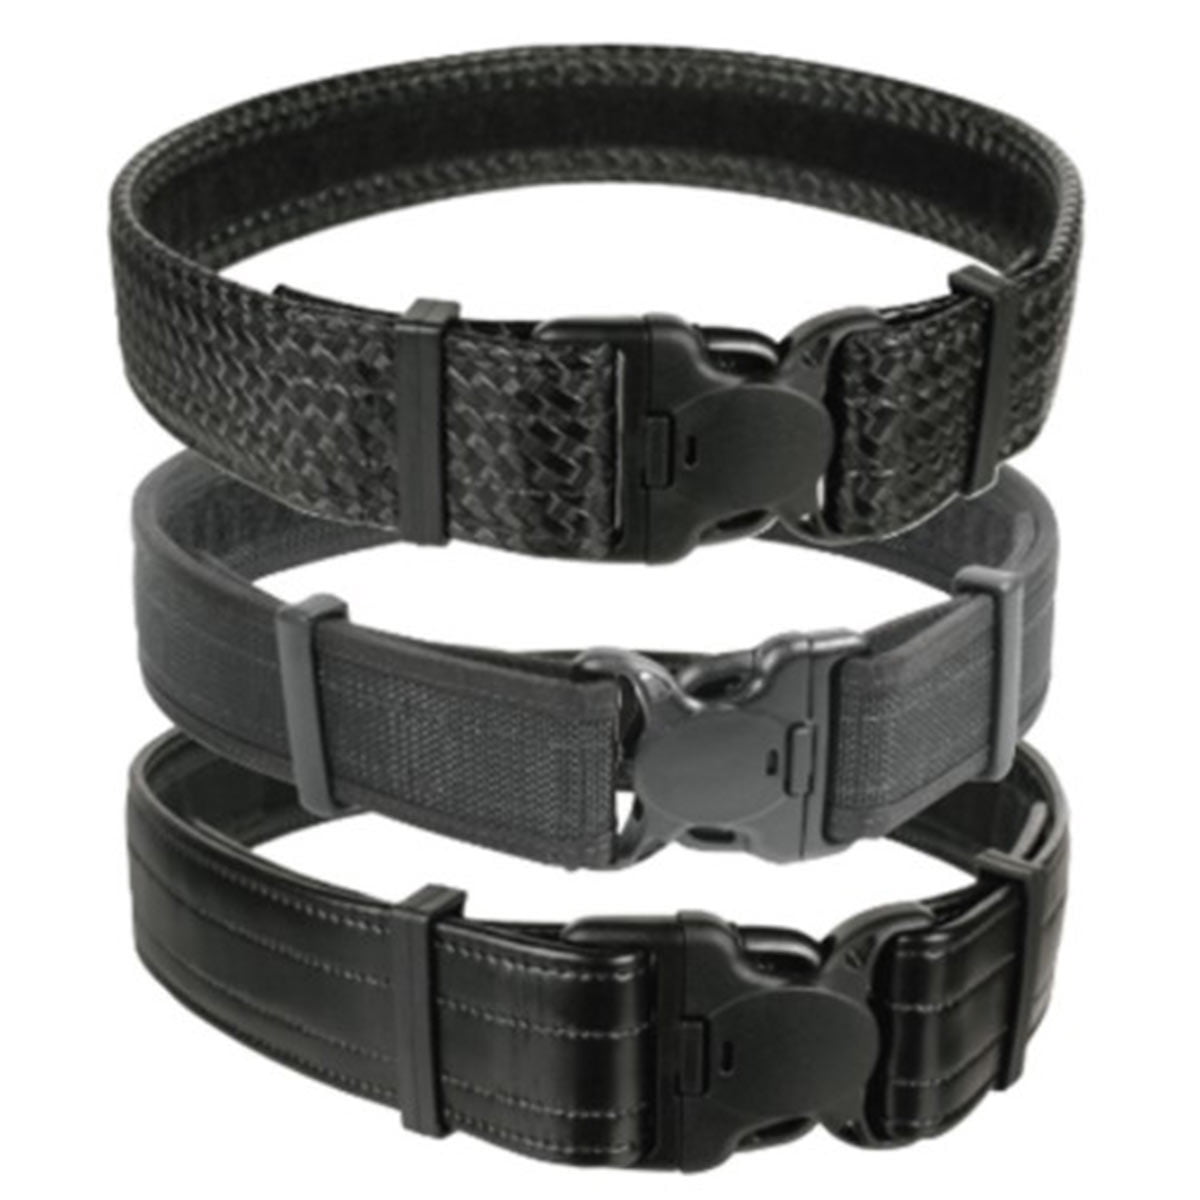 Rothco Plus Enhanced Molded Belt Keeper 4 Piece/set Black From Japan for sale online 